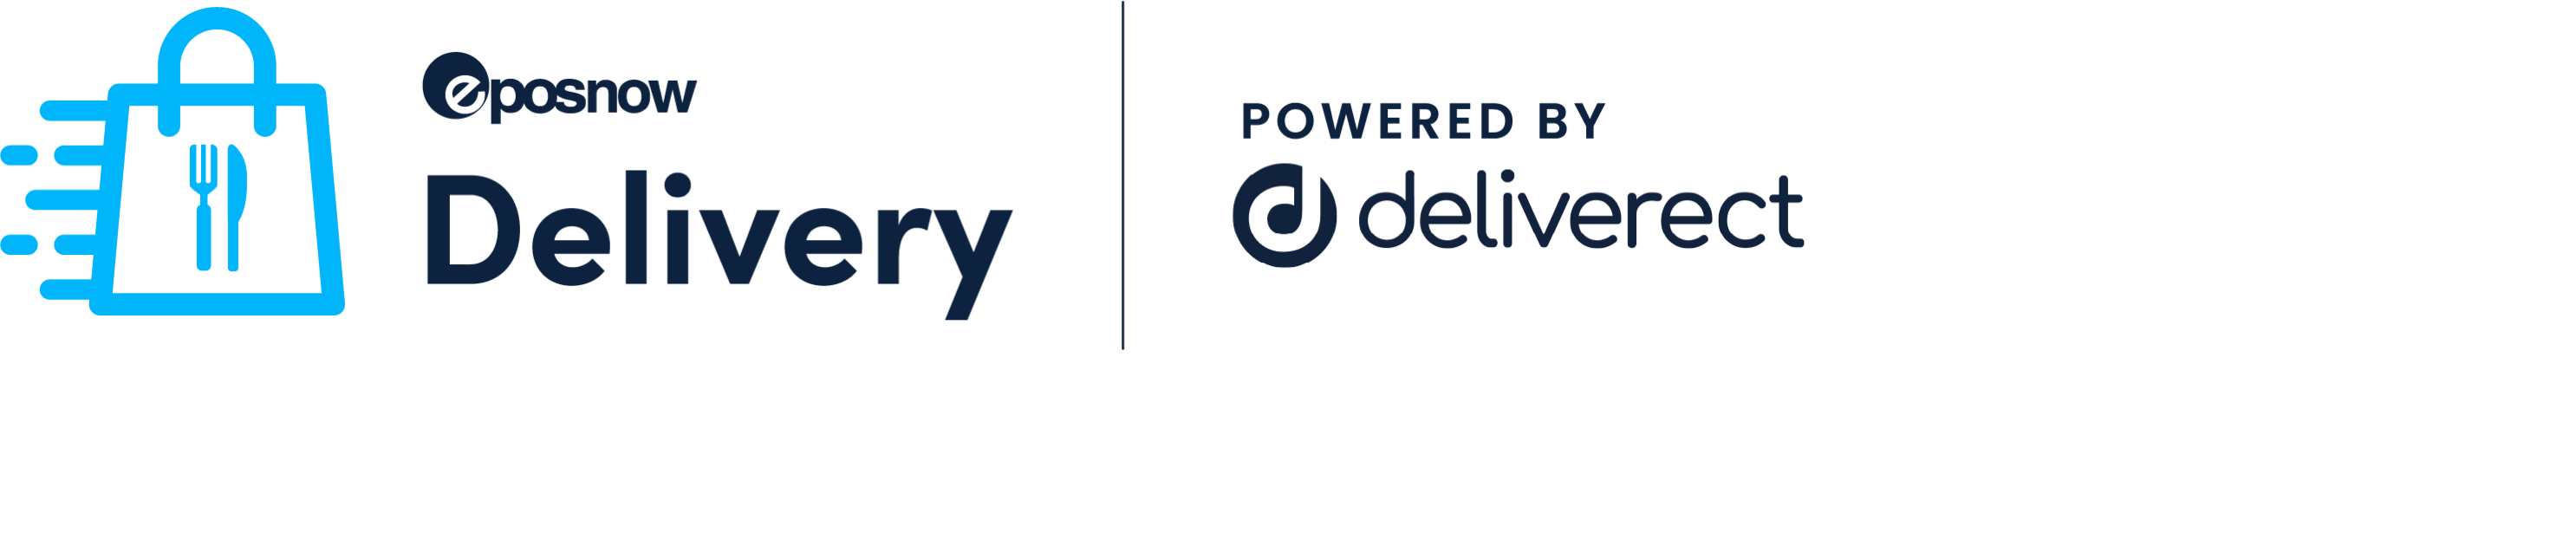 Epos Now Delivery   Powered by Deliverect